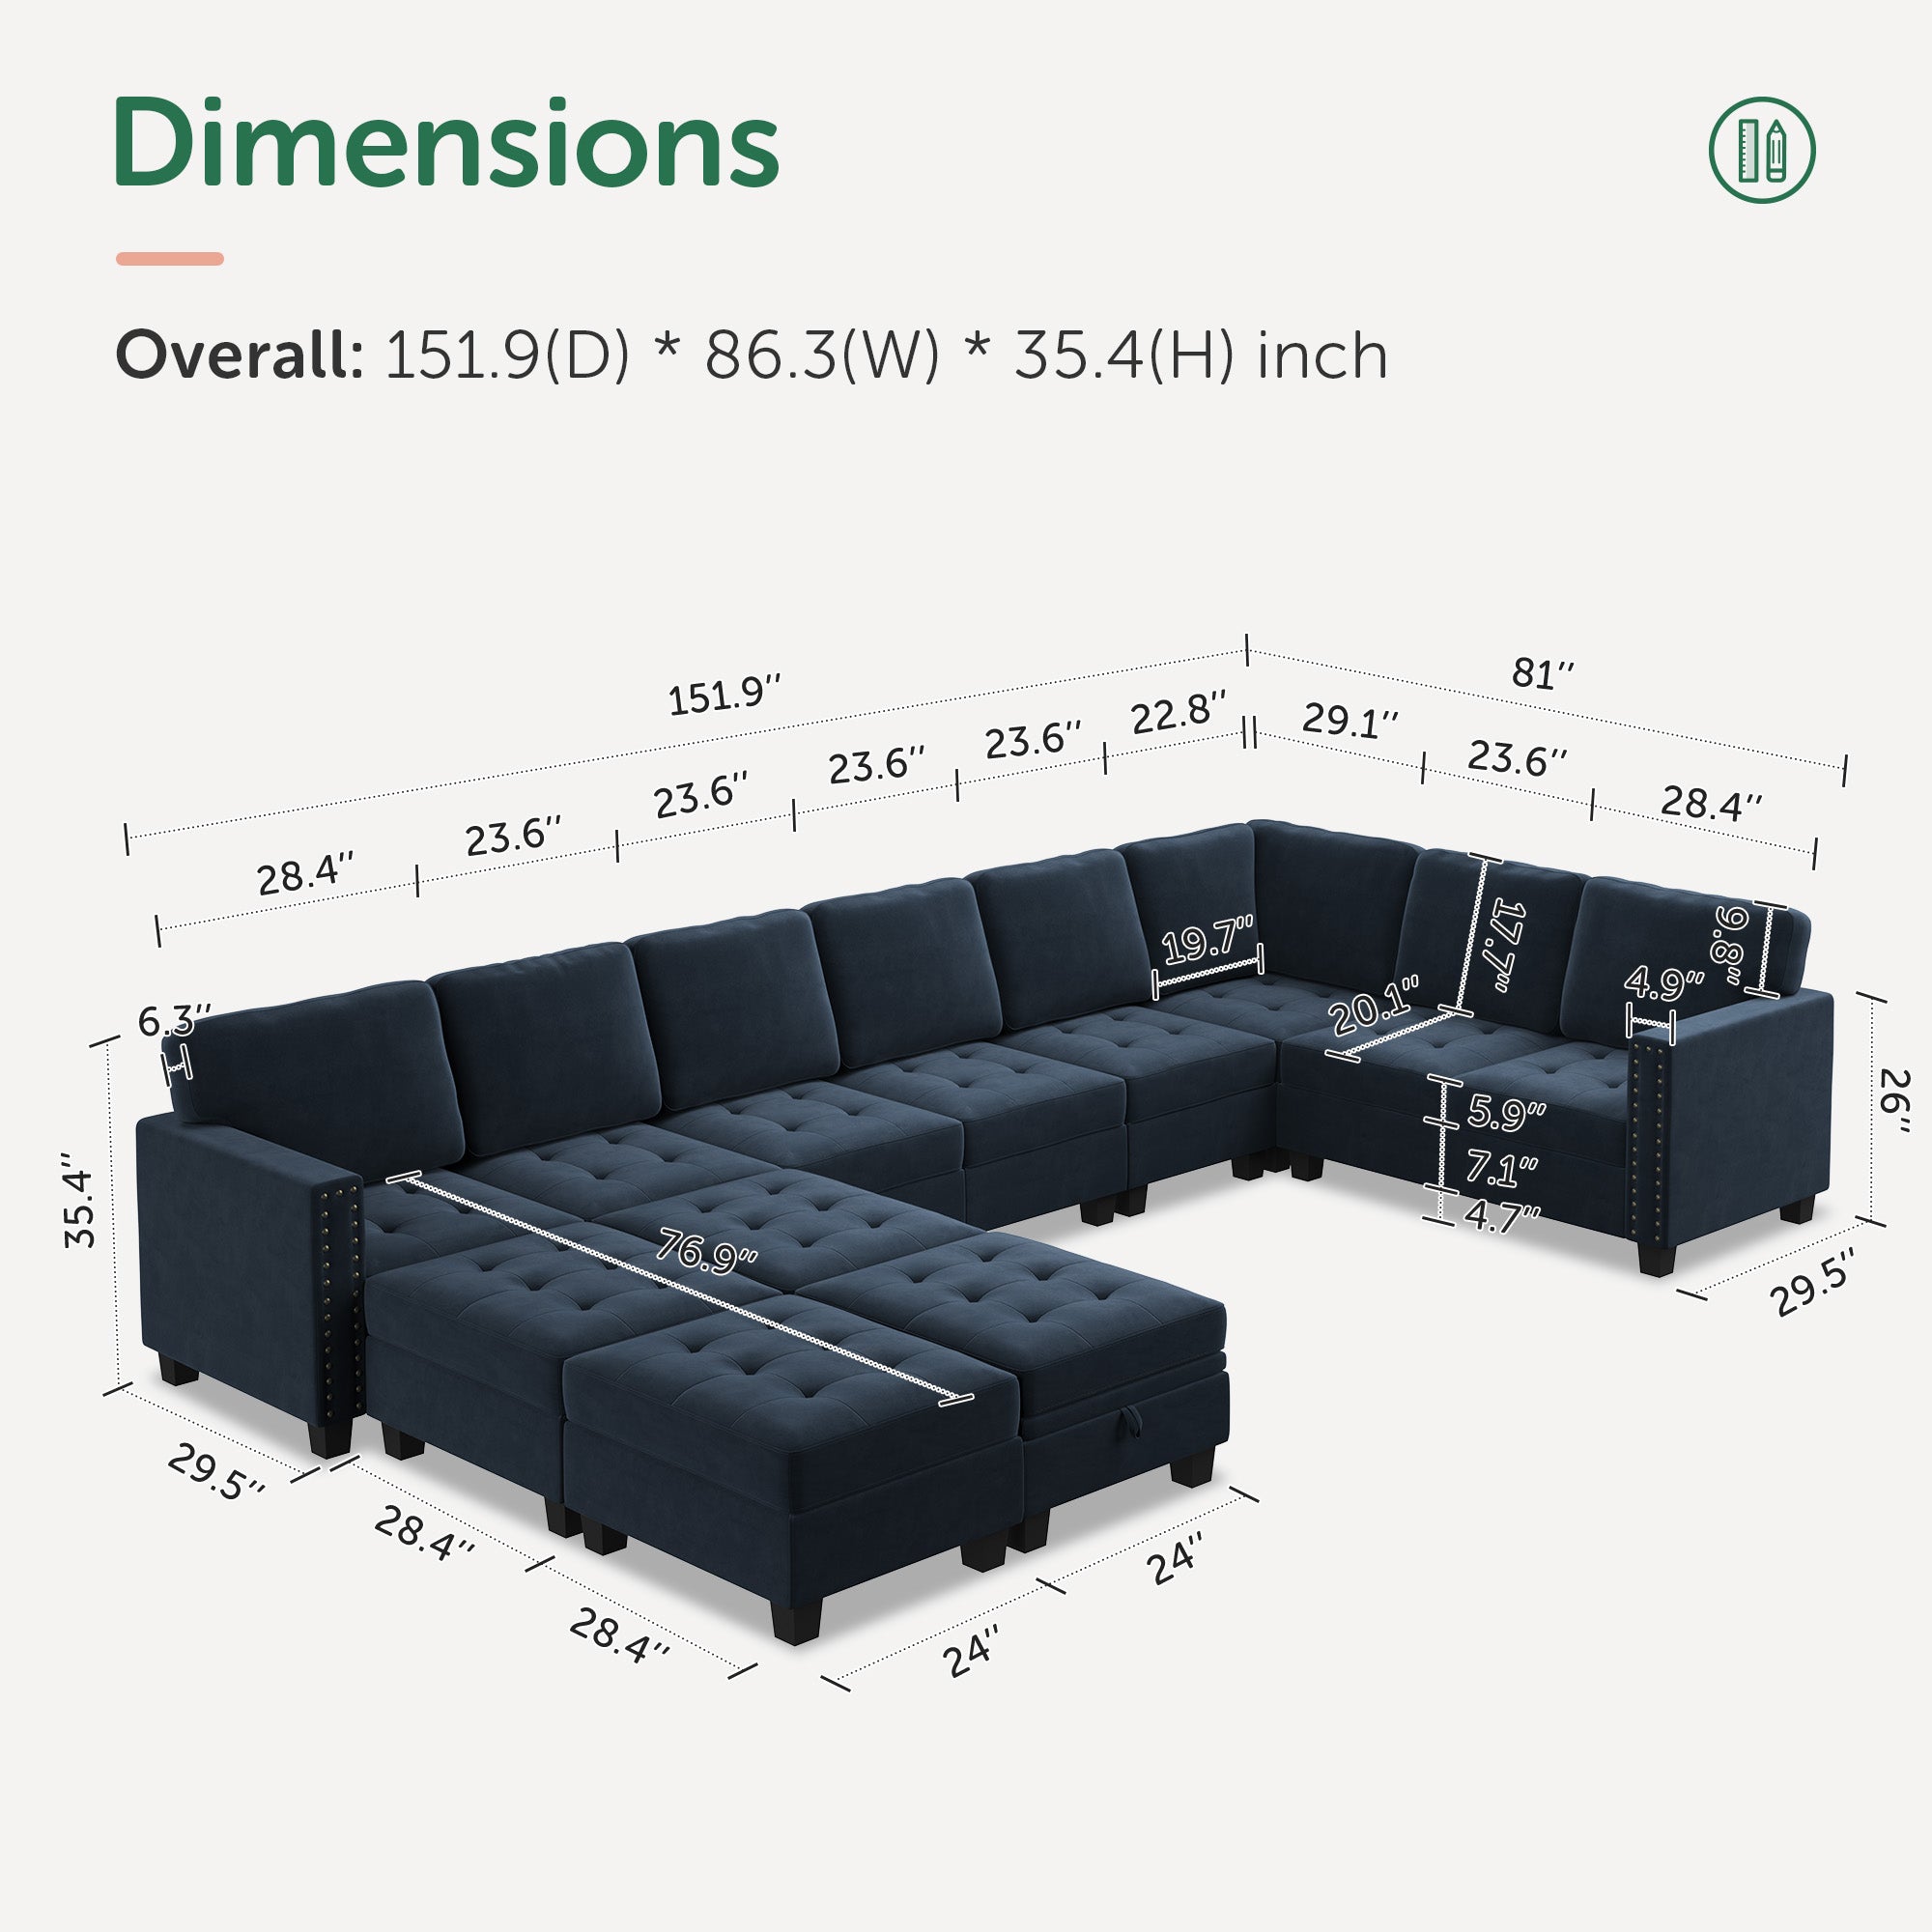 Velvet Modular Sleeper Sectional With Storage Space With Measurements